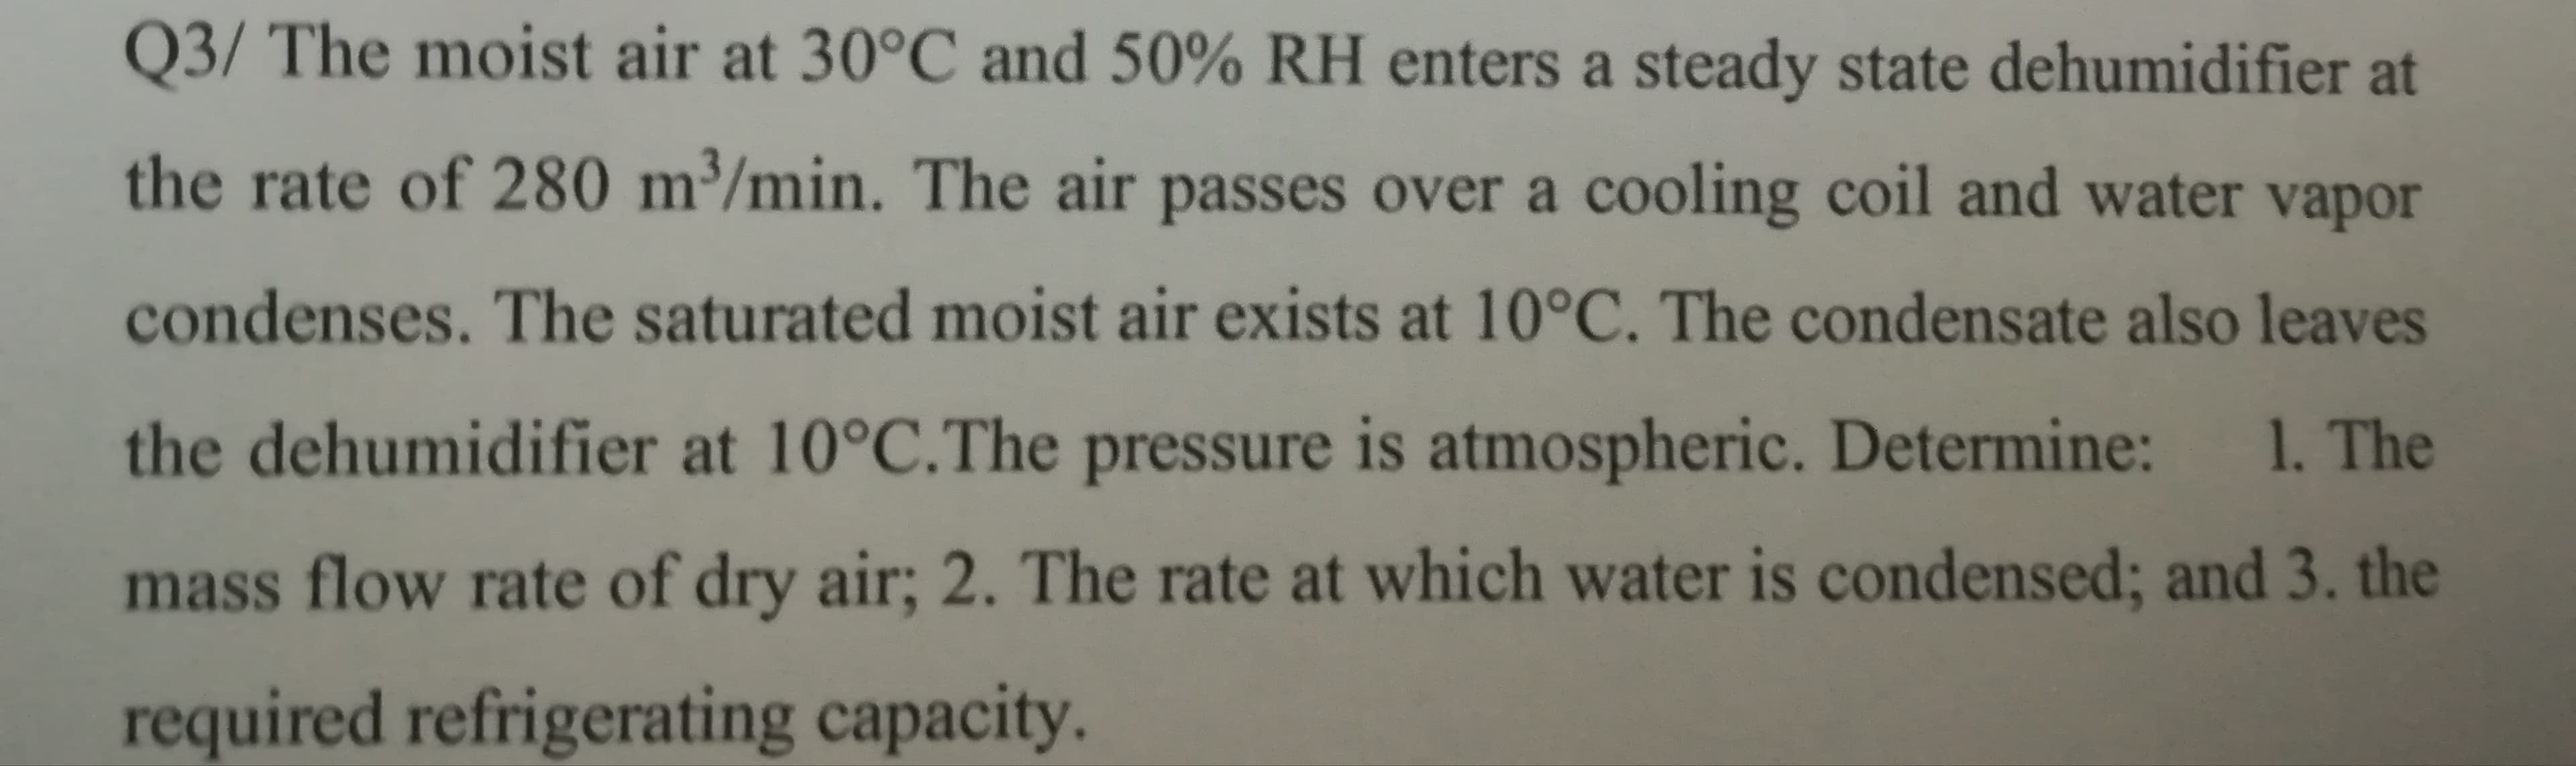 Q3/ The moist air at 30°C and 50% RH enters a steady state dehumidifier at
the rate of 280 m³/min. The air passes over a cooling coil and water vapor
condenses. The saturated moist air exists at 10°C. The condensate also leaves
the dehumidifier at 10°C.The pressure is atmospheric. Determine:
1. The
mass flow rate of dry air; 2. The rate at which water is condensed; and 3. the
